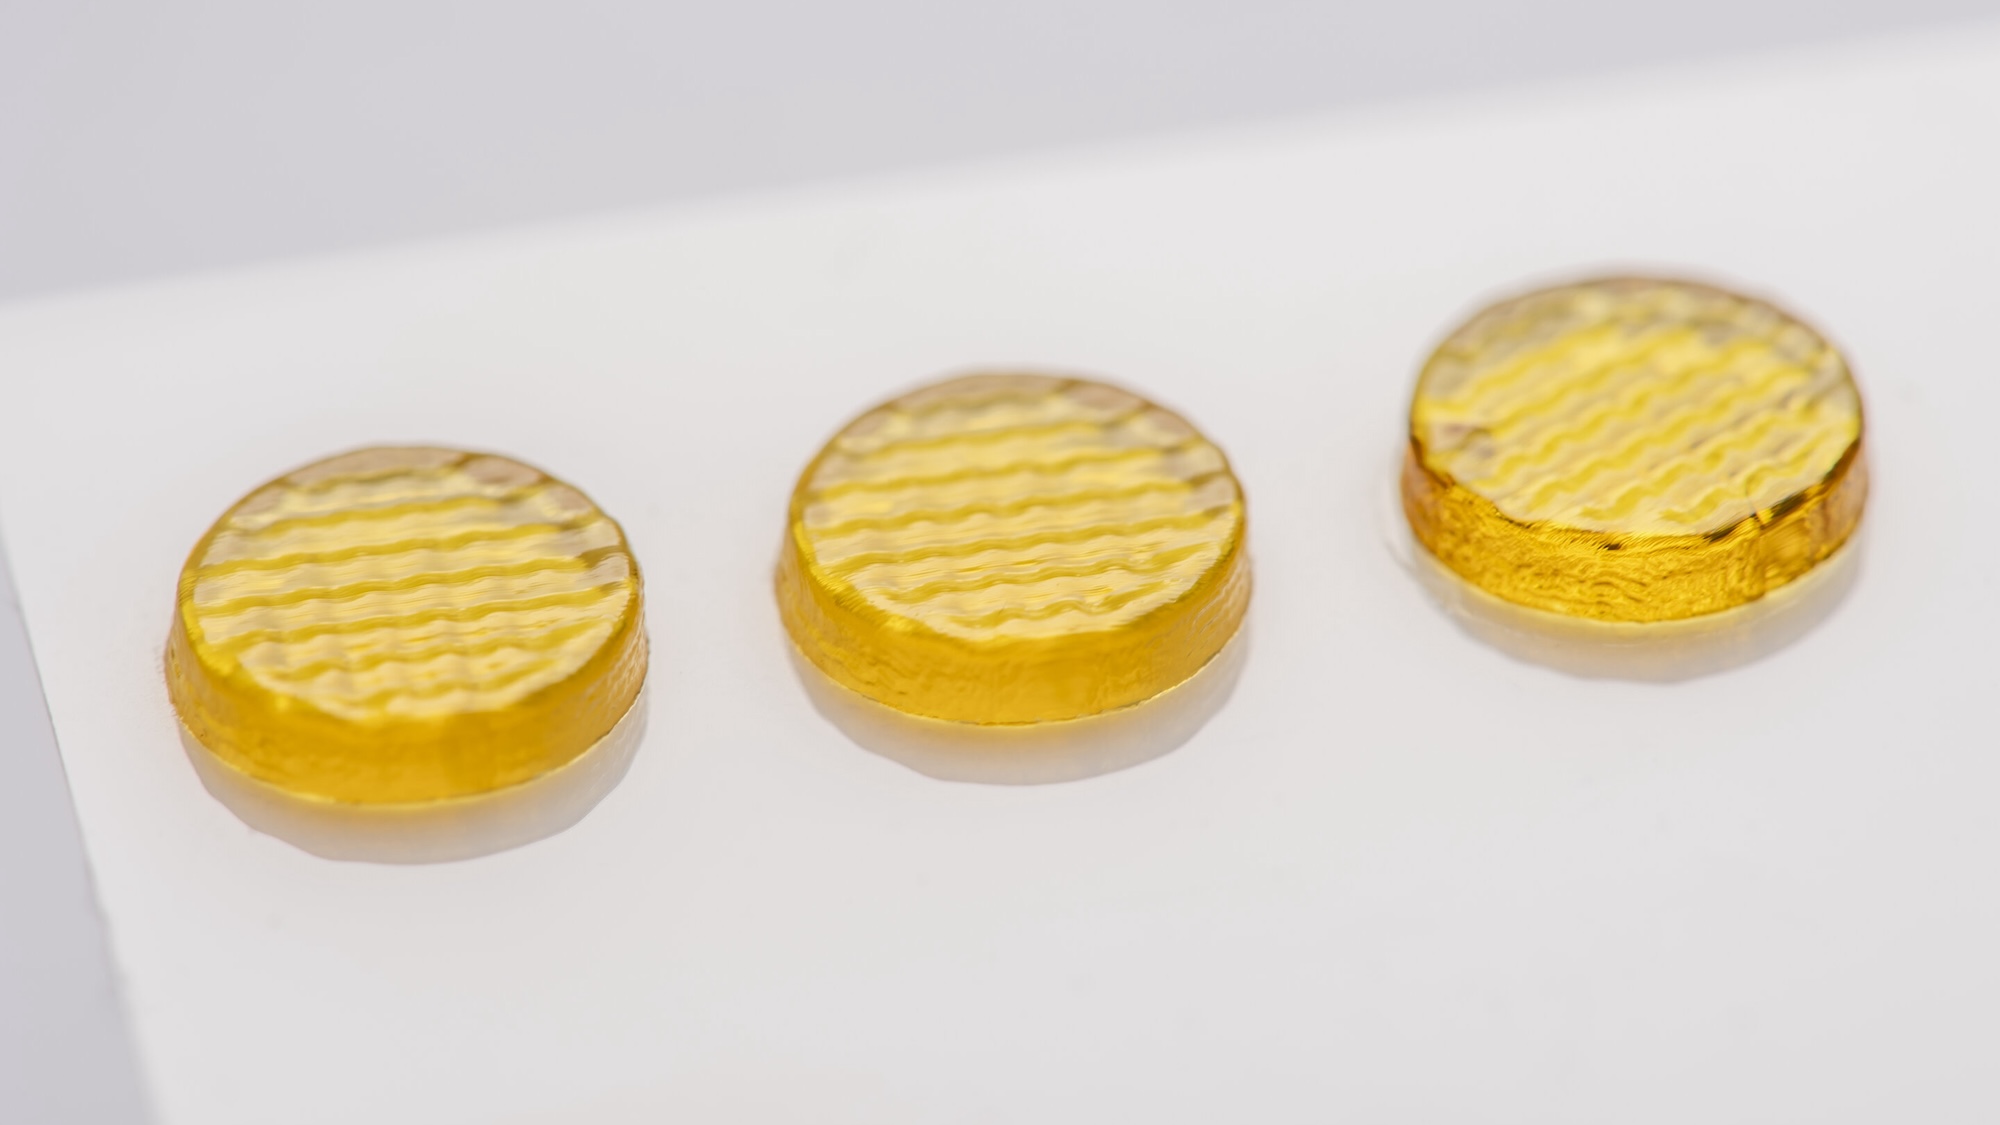 One 3D-printed ‘polypill’ could fit an entire day’s medications